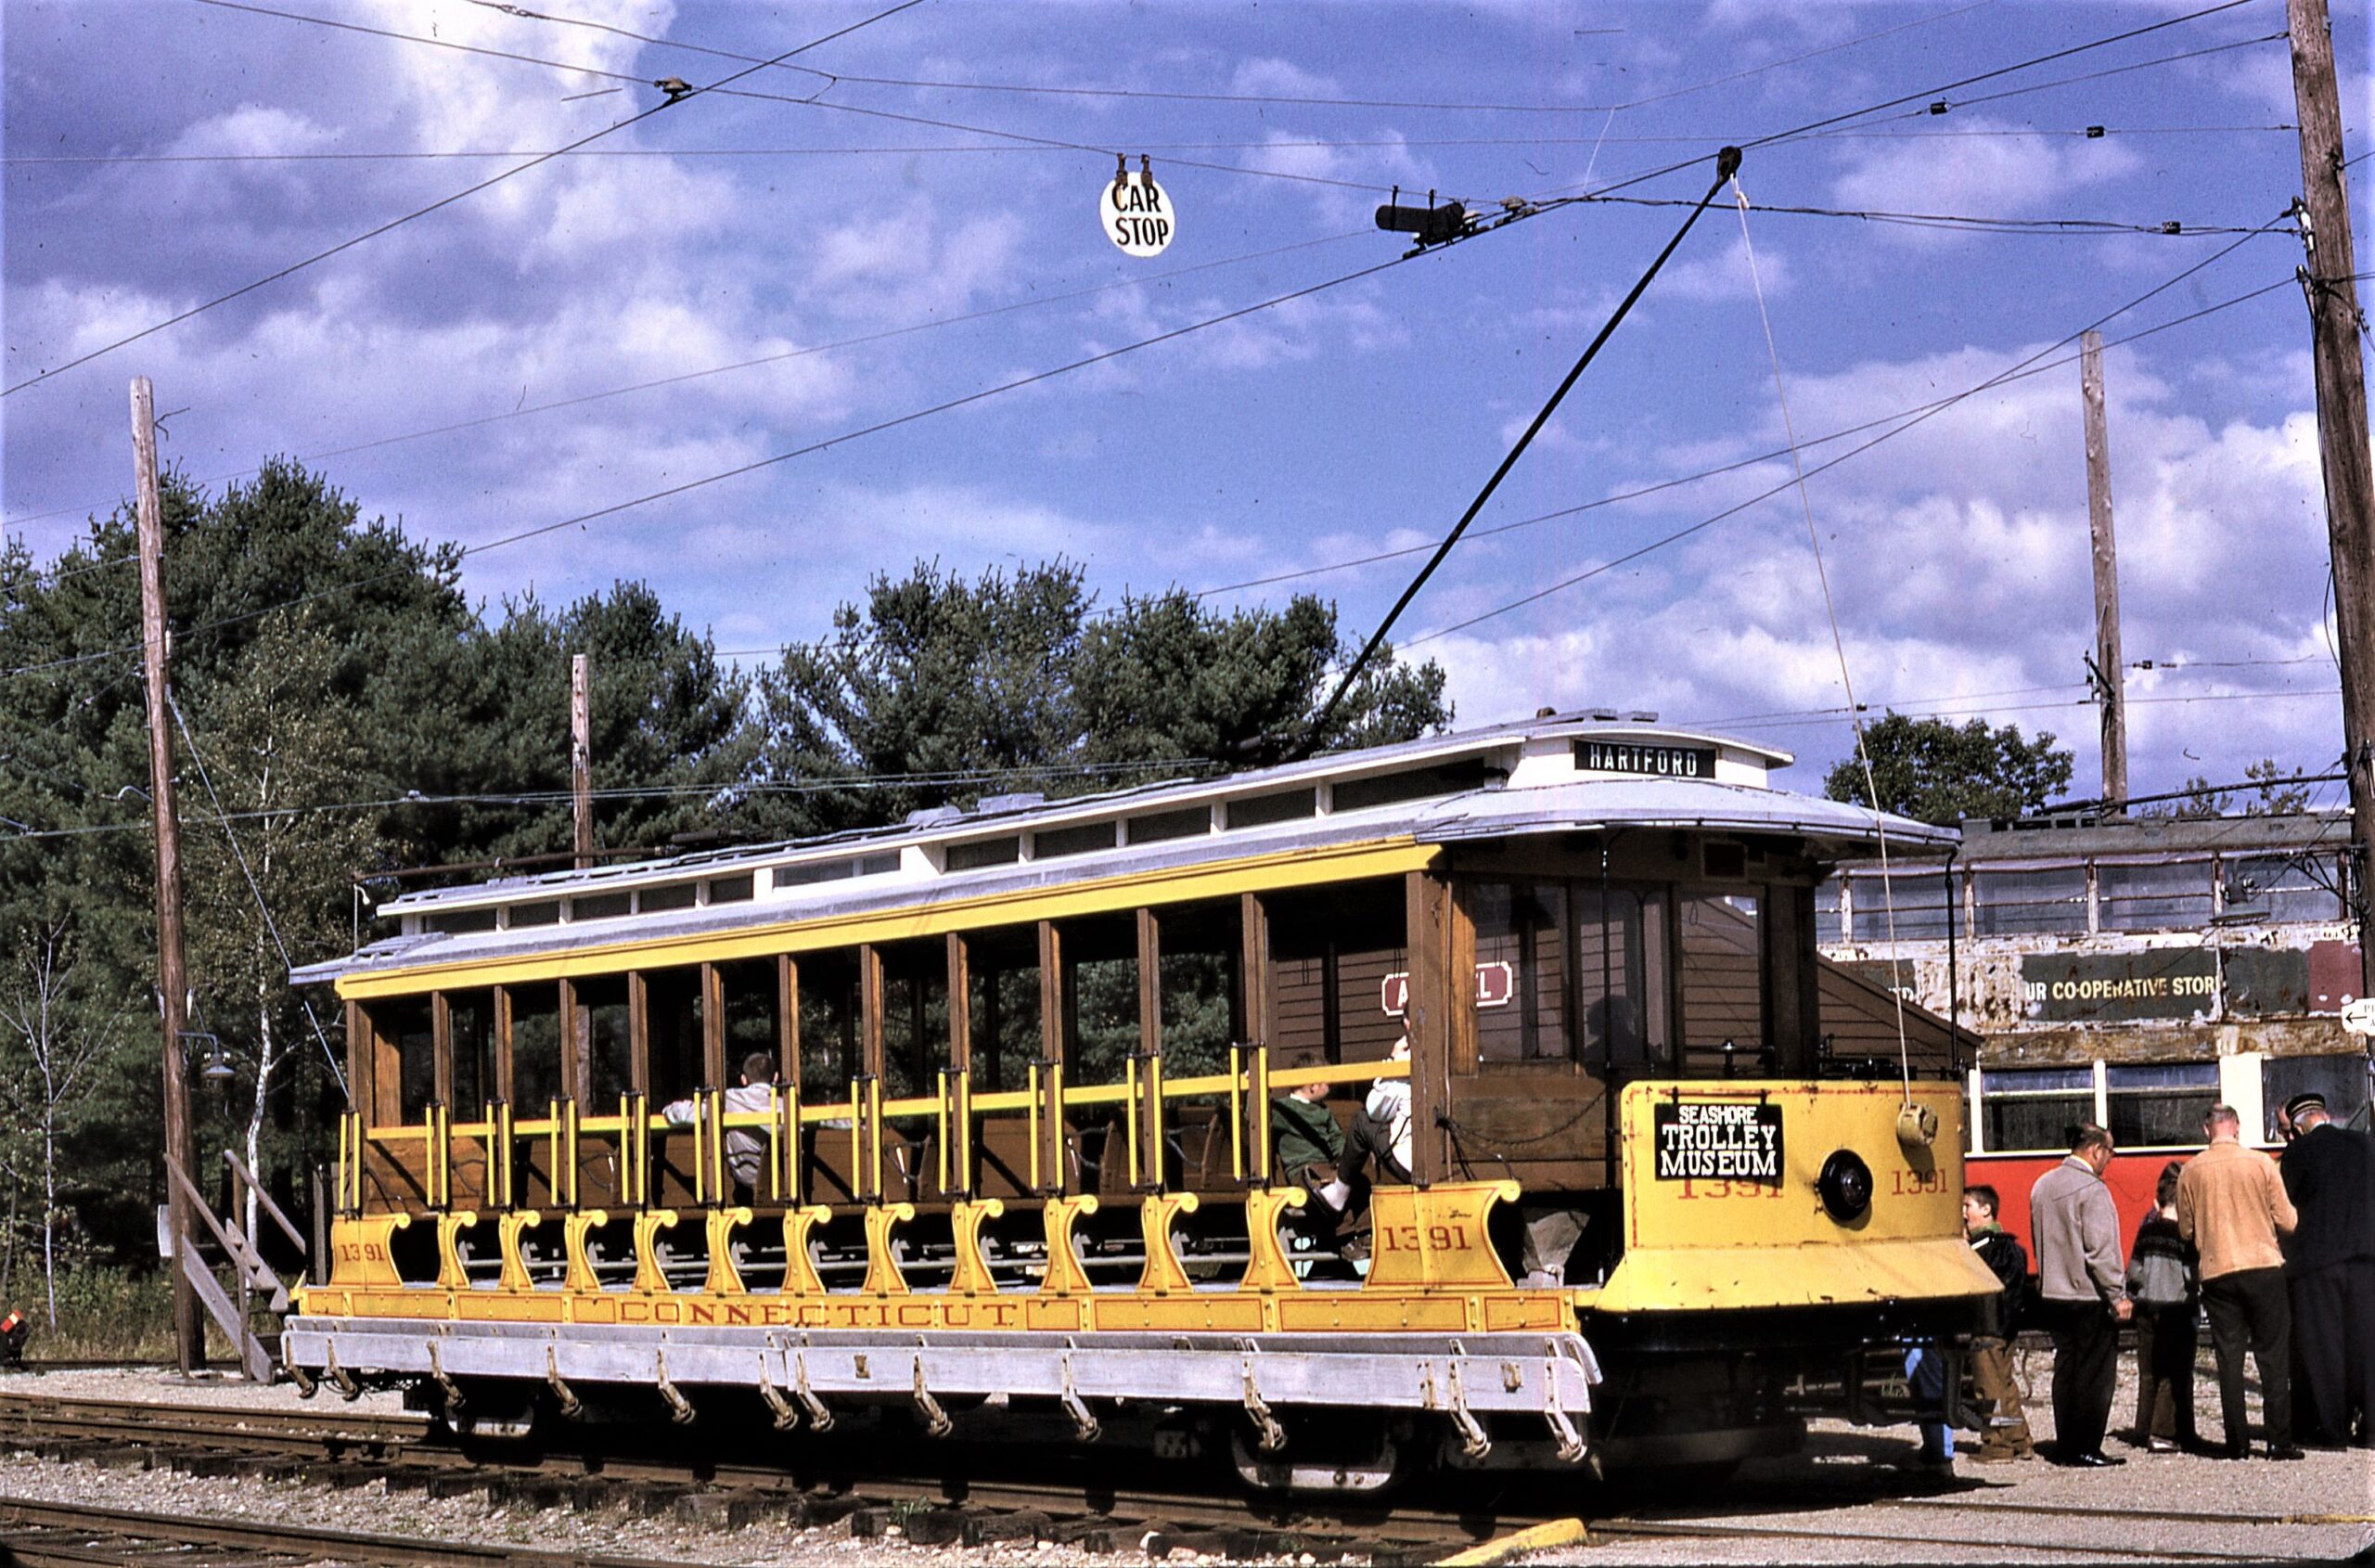 Connecticut Company | Seashore Trolley Museum | Kennebunkport, Maine | Open electric trolley car #1391 | October 4, 1970 | Jack DeRossett photograph | Morning Sun Books Collection